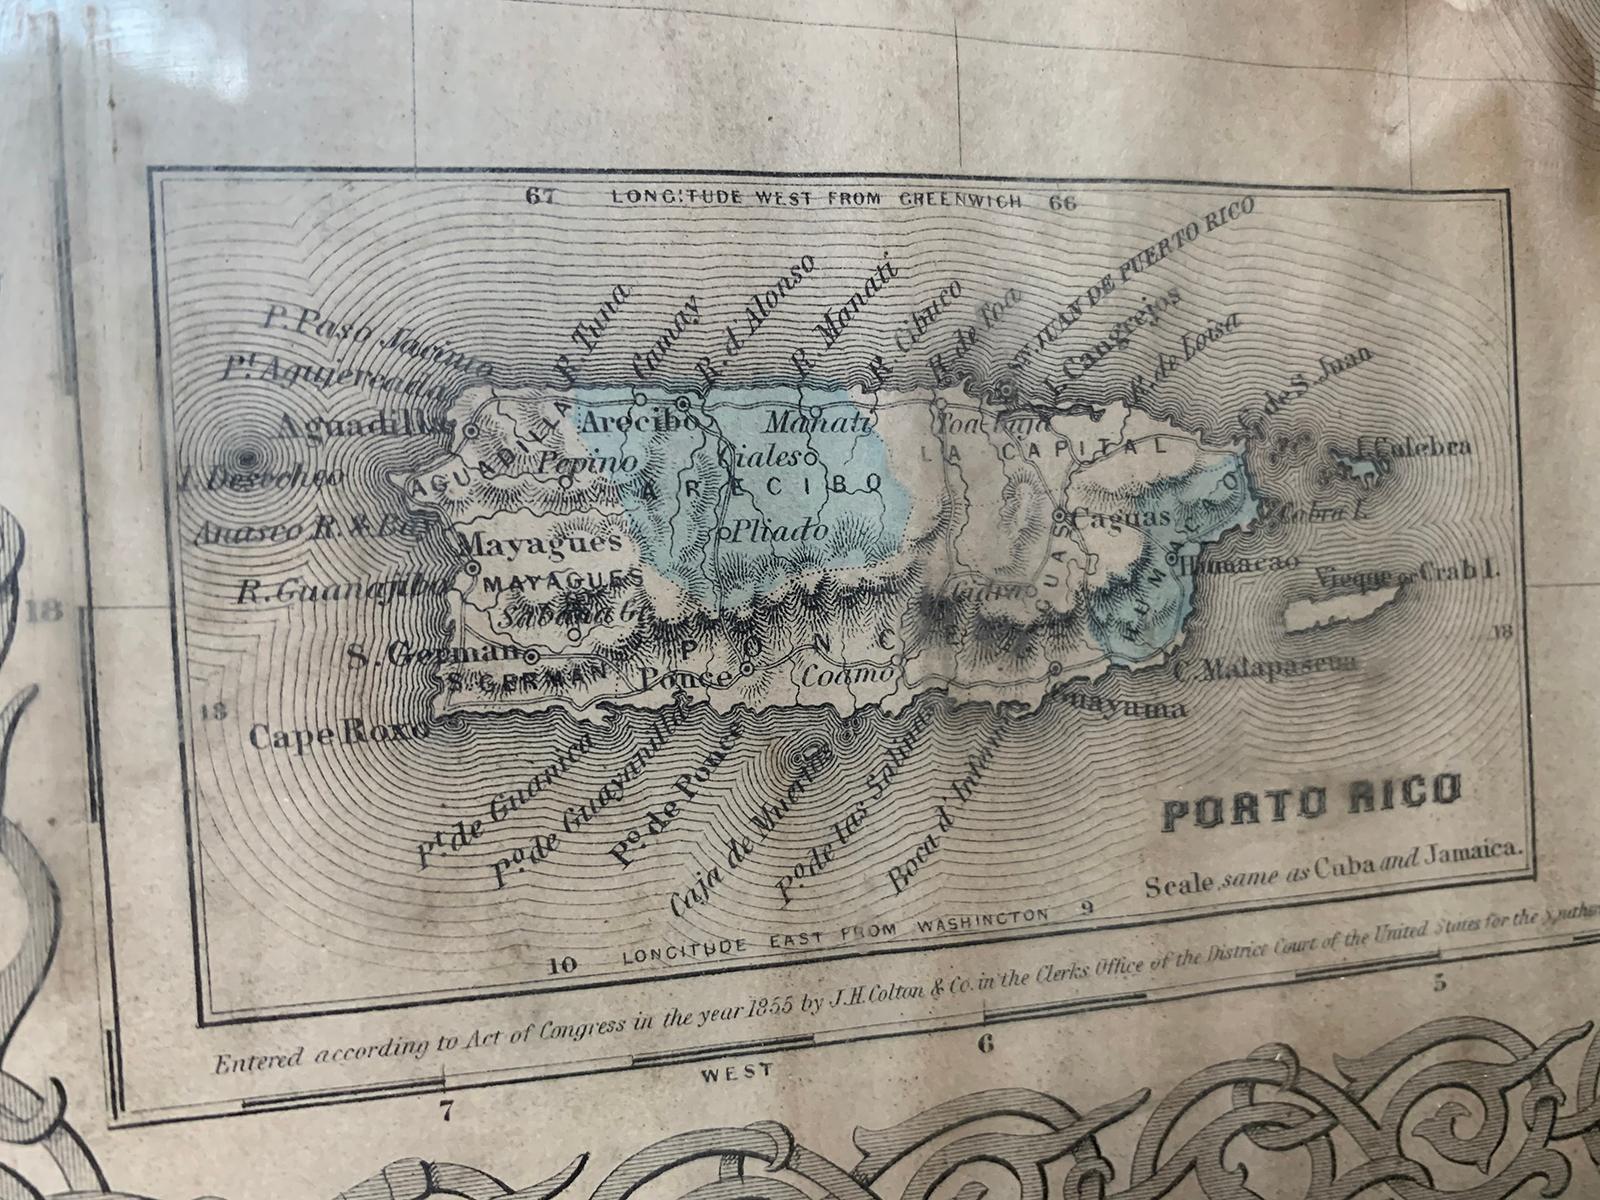 J.H. Colton & Co. Hand Colored Engraved Map of Cuba, Jamaica, & Puerto Rico 6